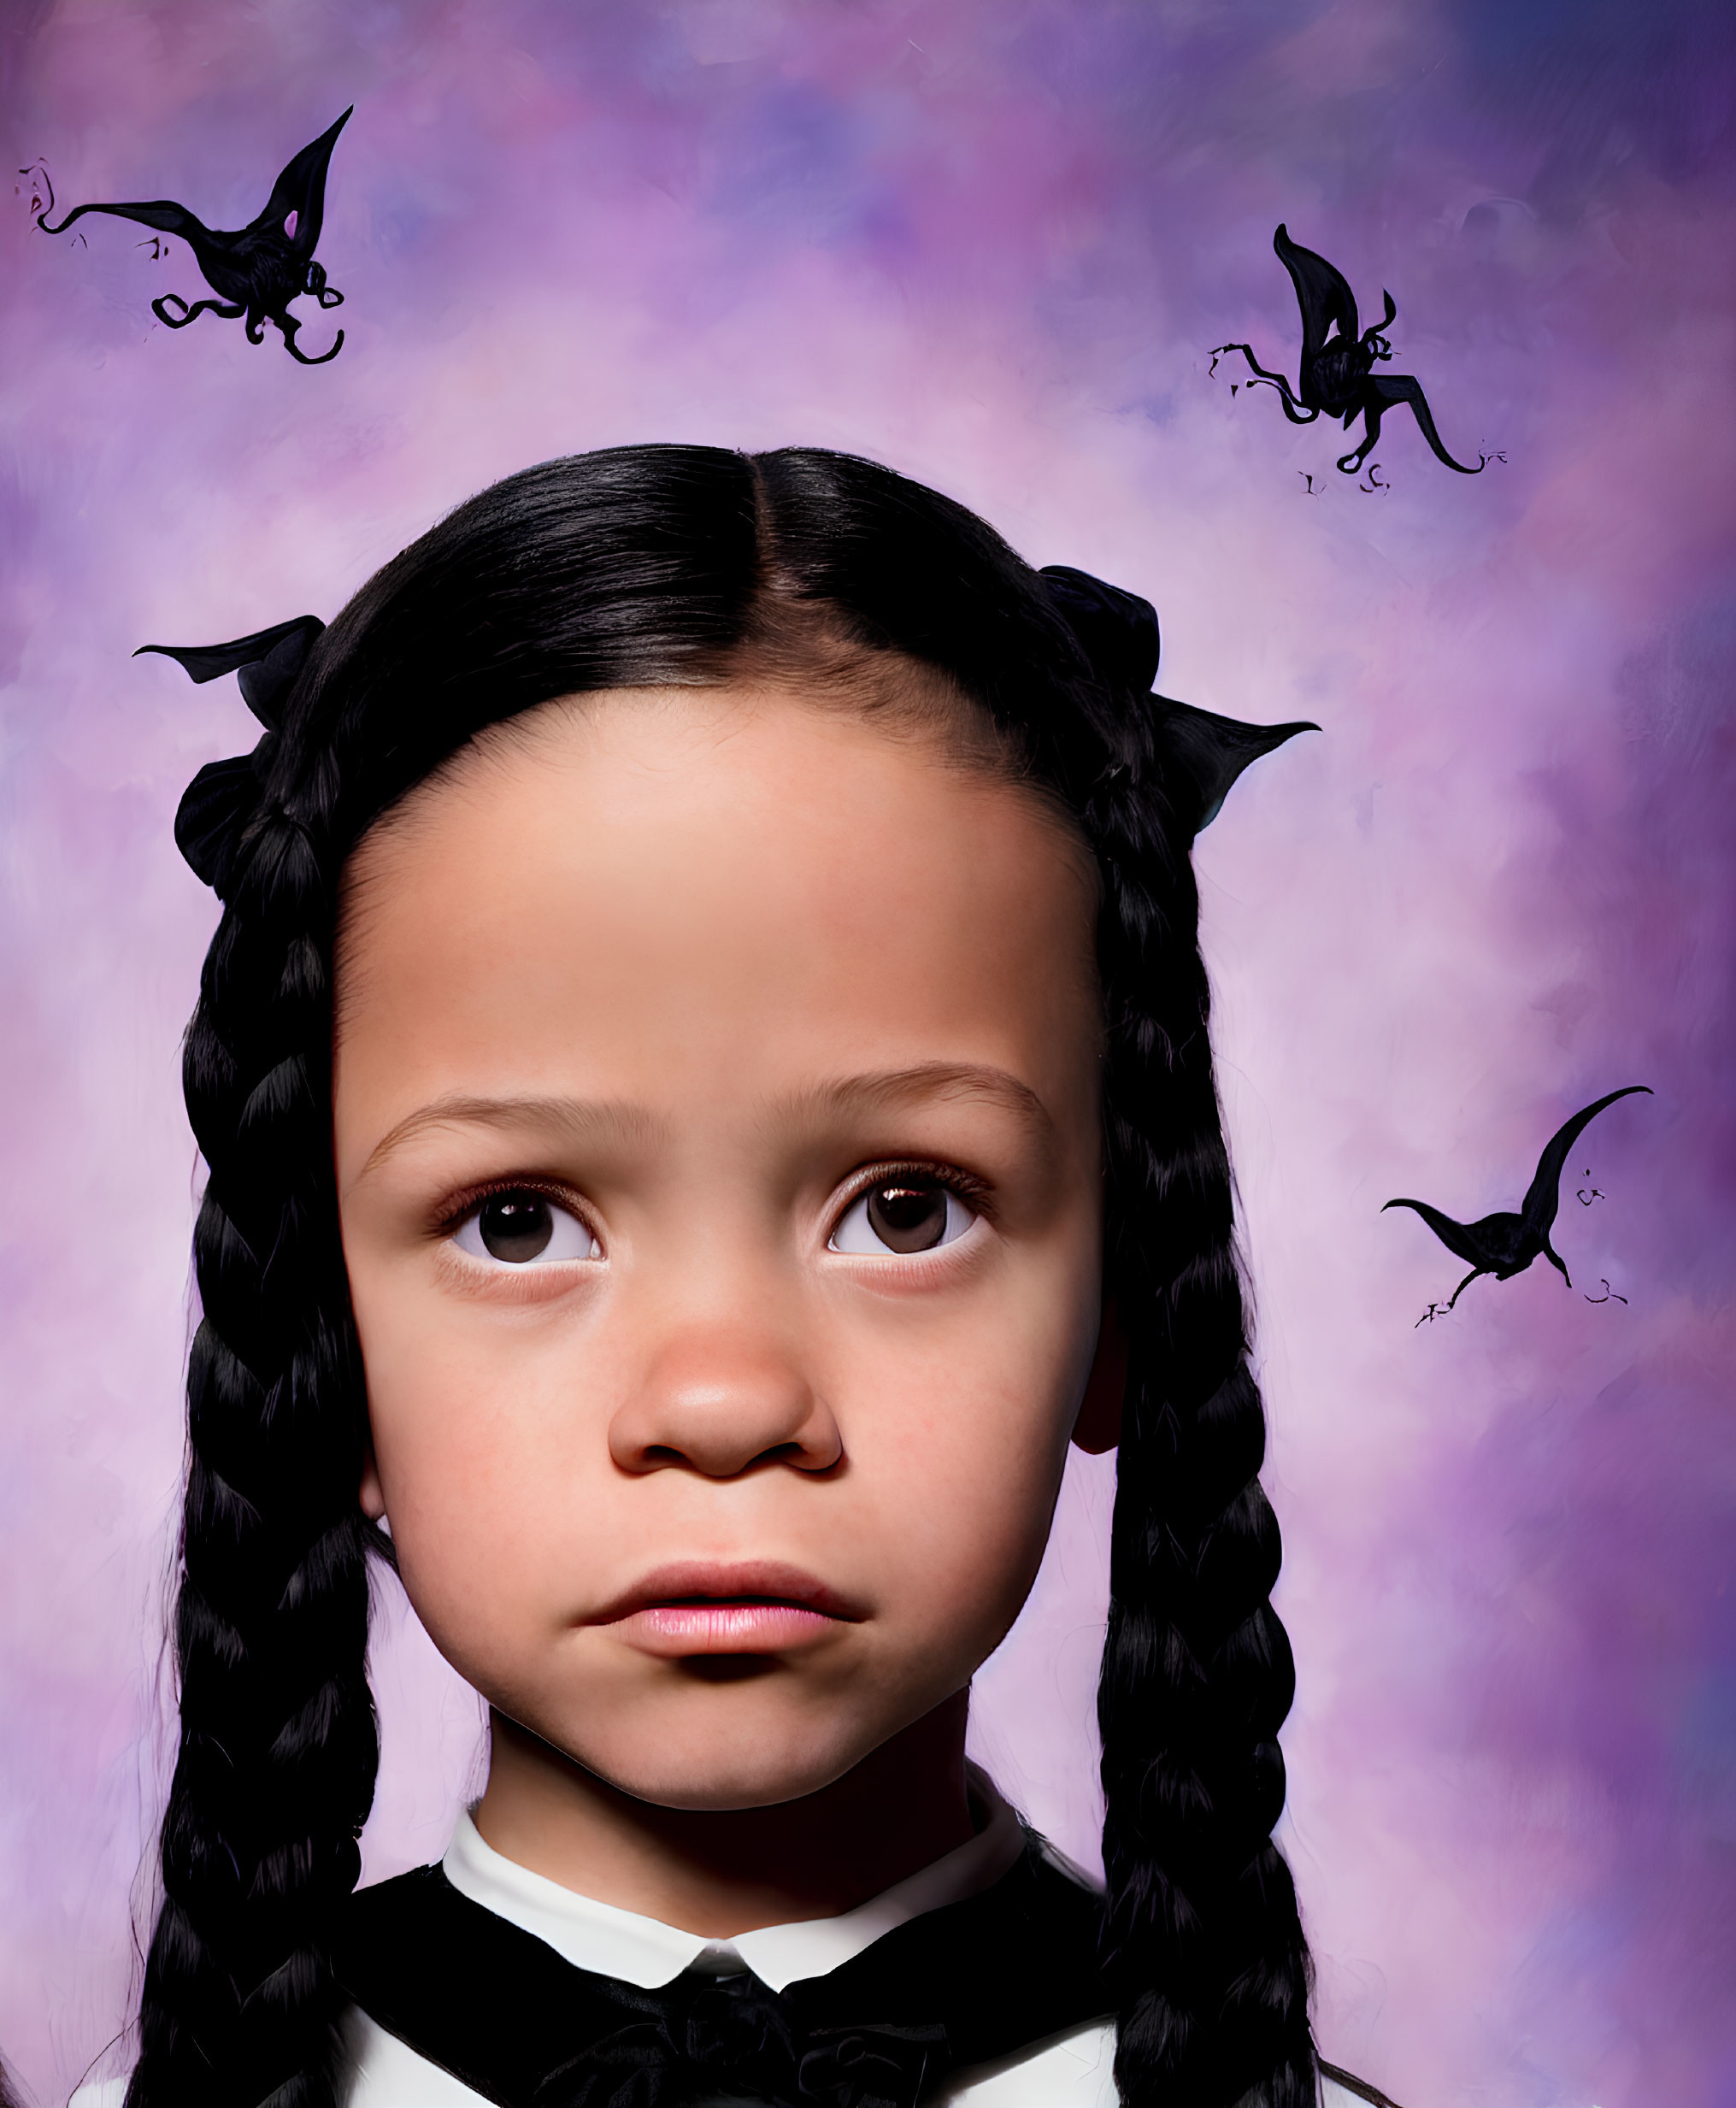 Serious young girl with braided hair in black dress, bats on purple background